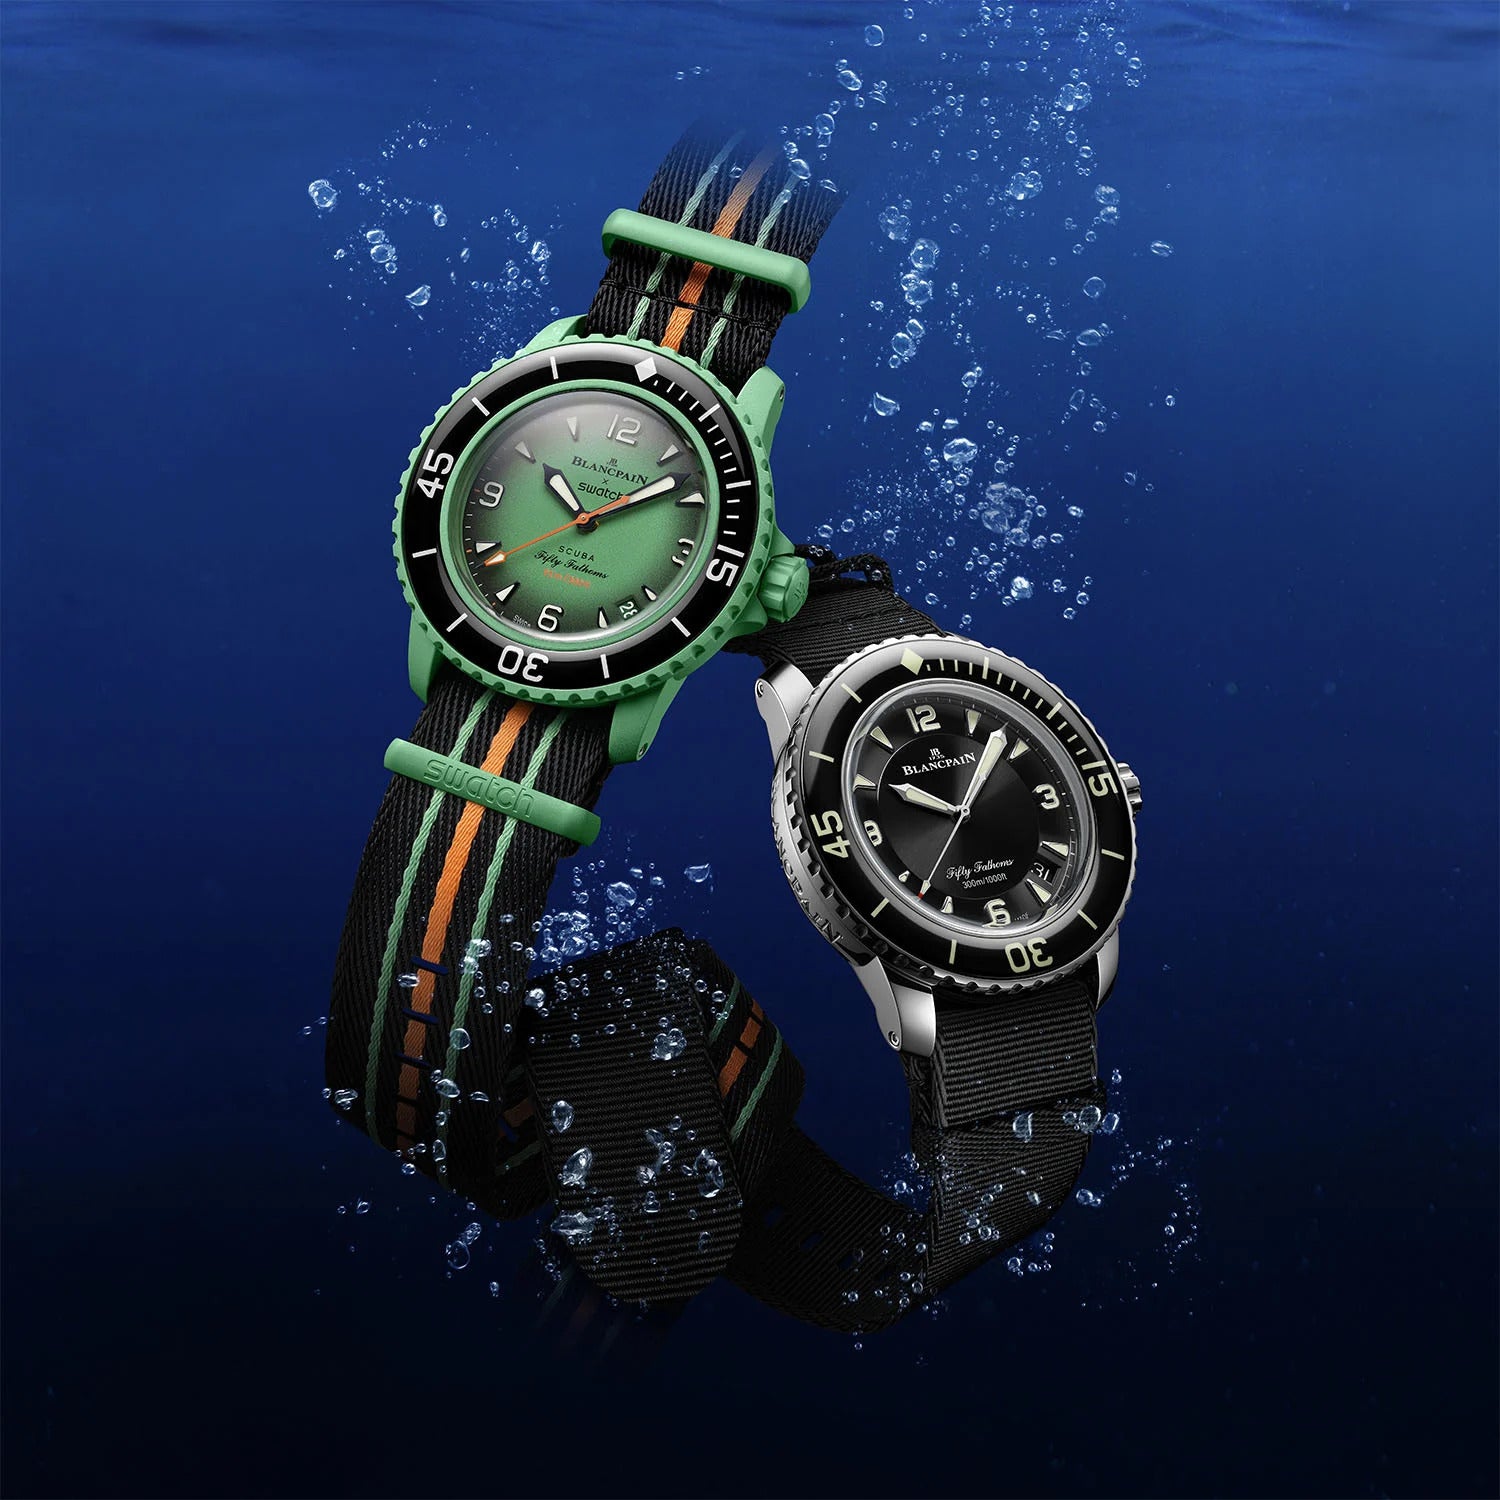 Introducing the Swatch x Blancpain Scuba: Swatch's Latest Bioceramic Collab With The Blancpain Fifty Fathoms